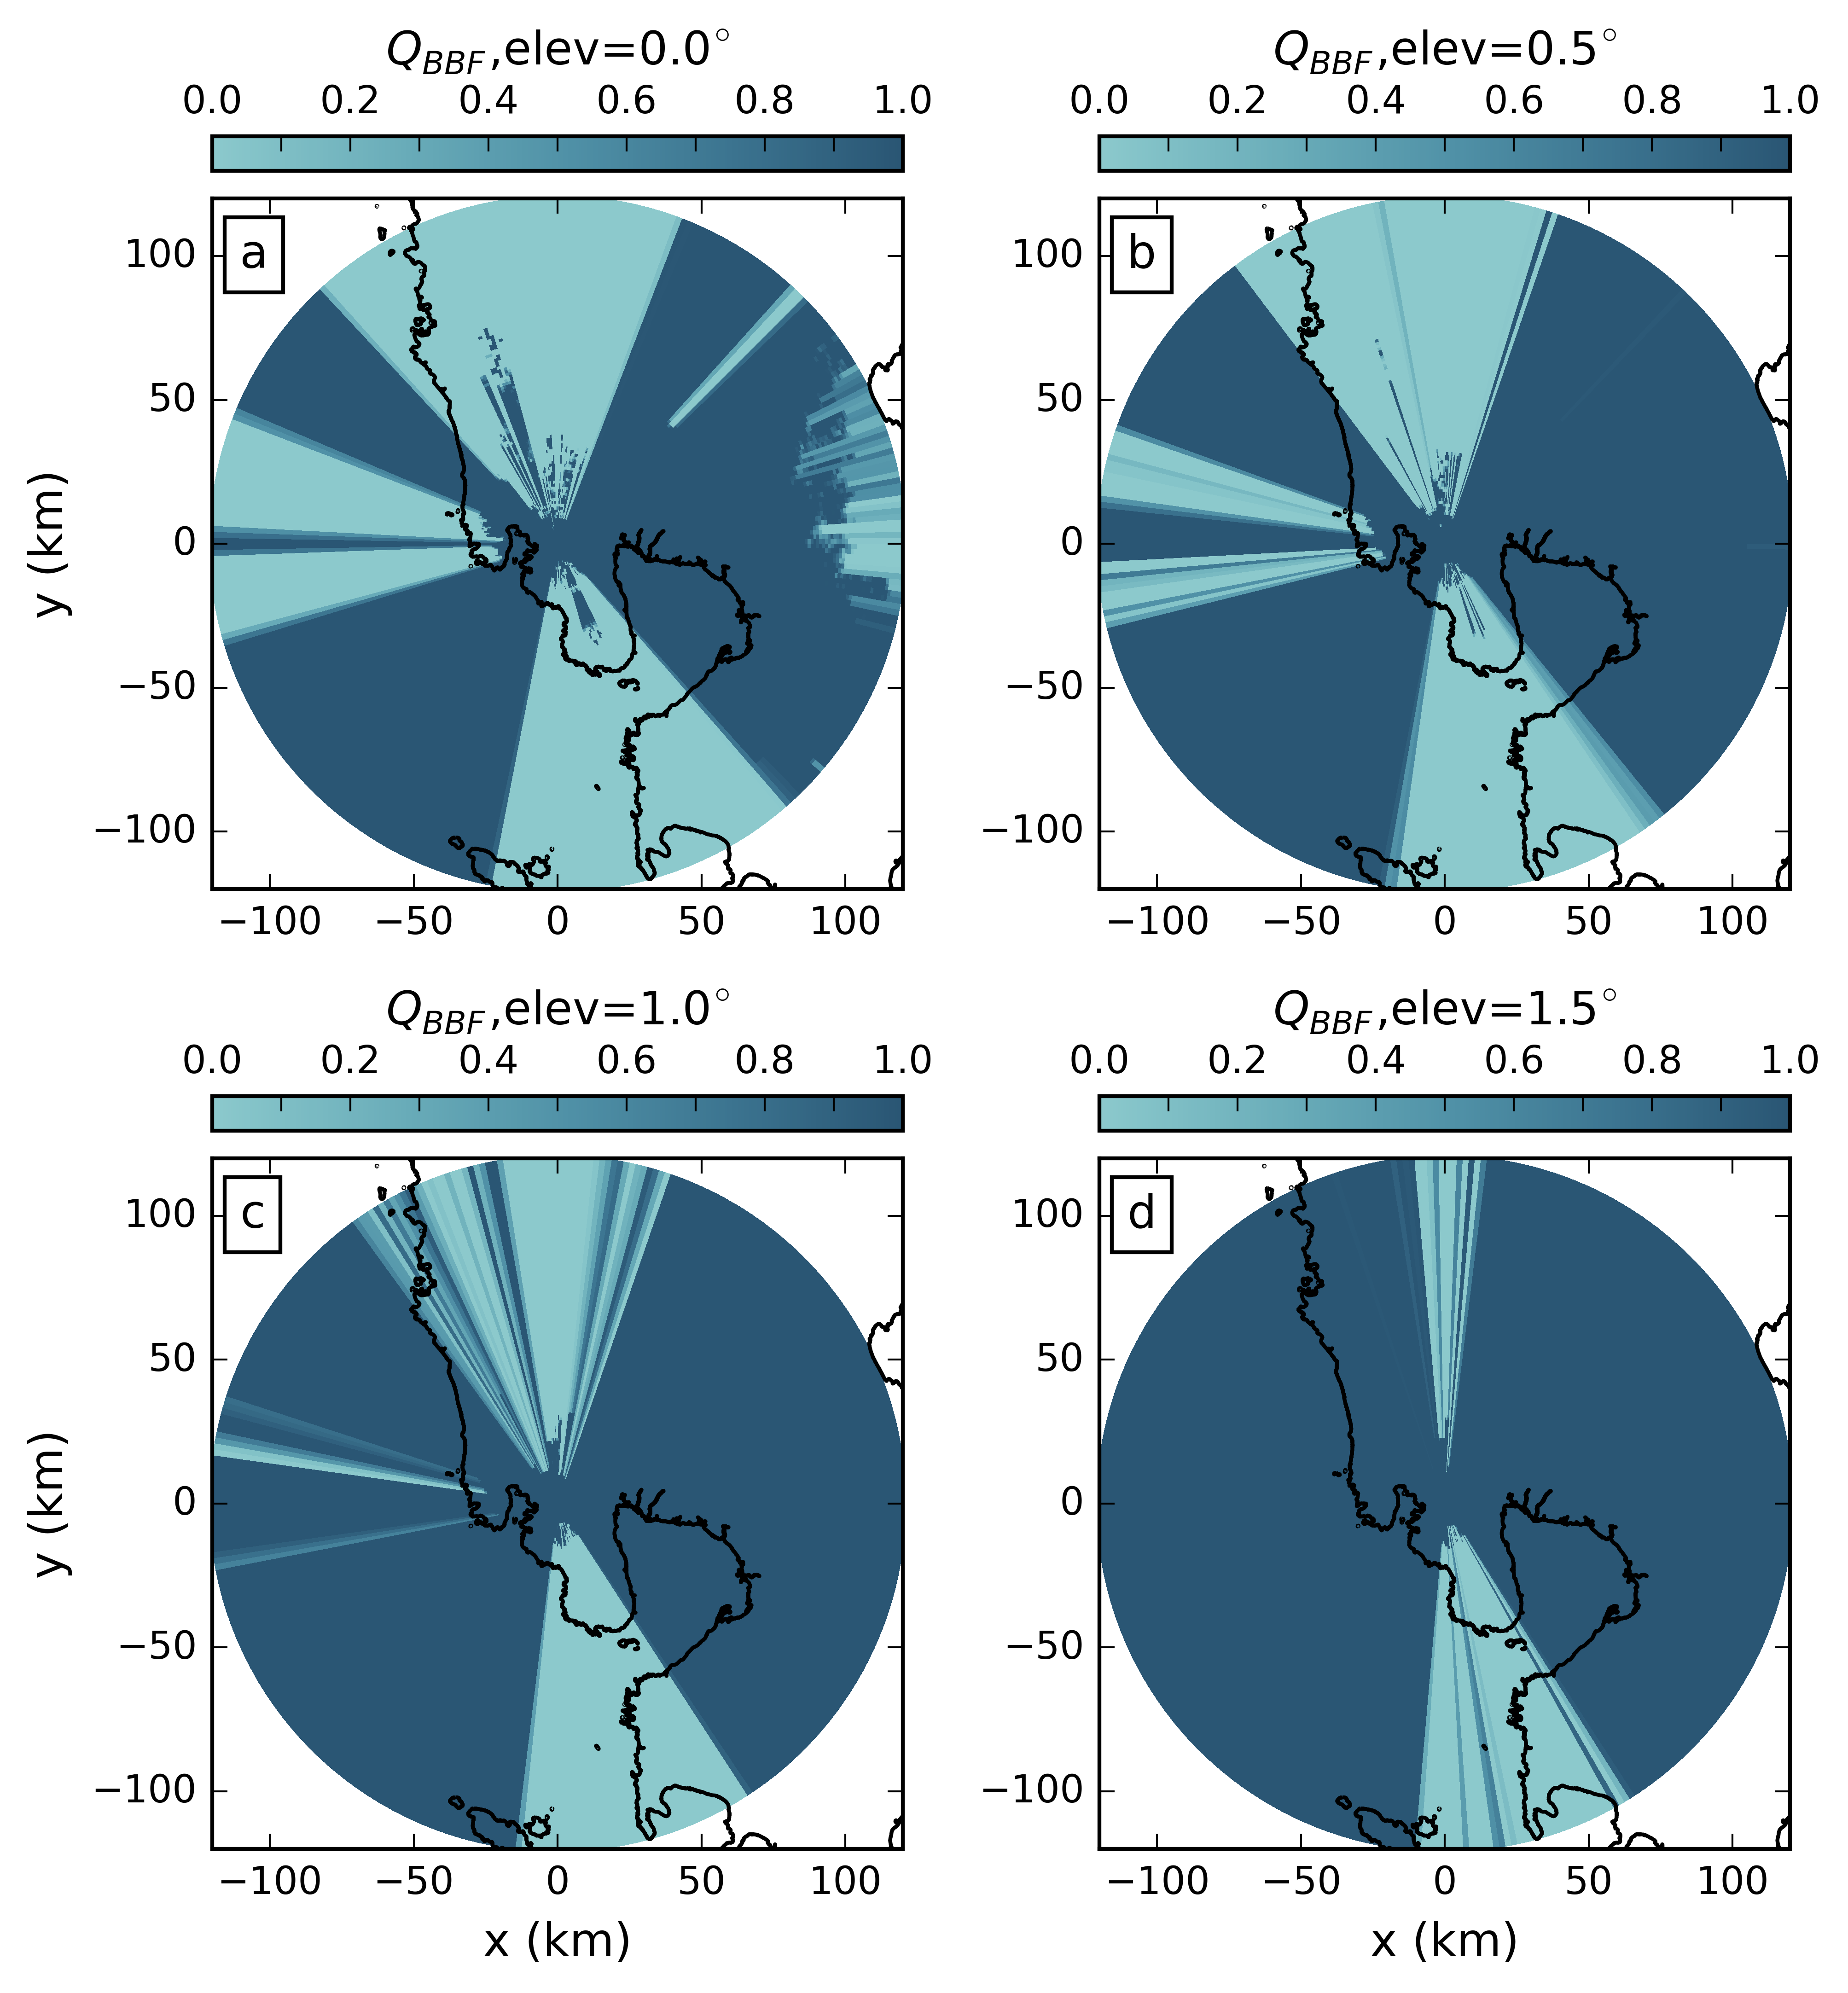 Quality index map of the beam blockage fraction for the Subic radar at (a) 0.0$^{\circ}$, (b) 0.5$^{\circ}$, (c) 1.0$^{\circ}$, and (d) 1.5$^{\circ}$ elevation angles.